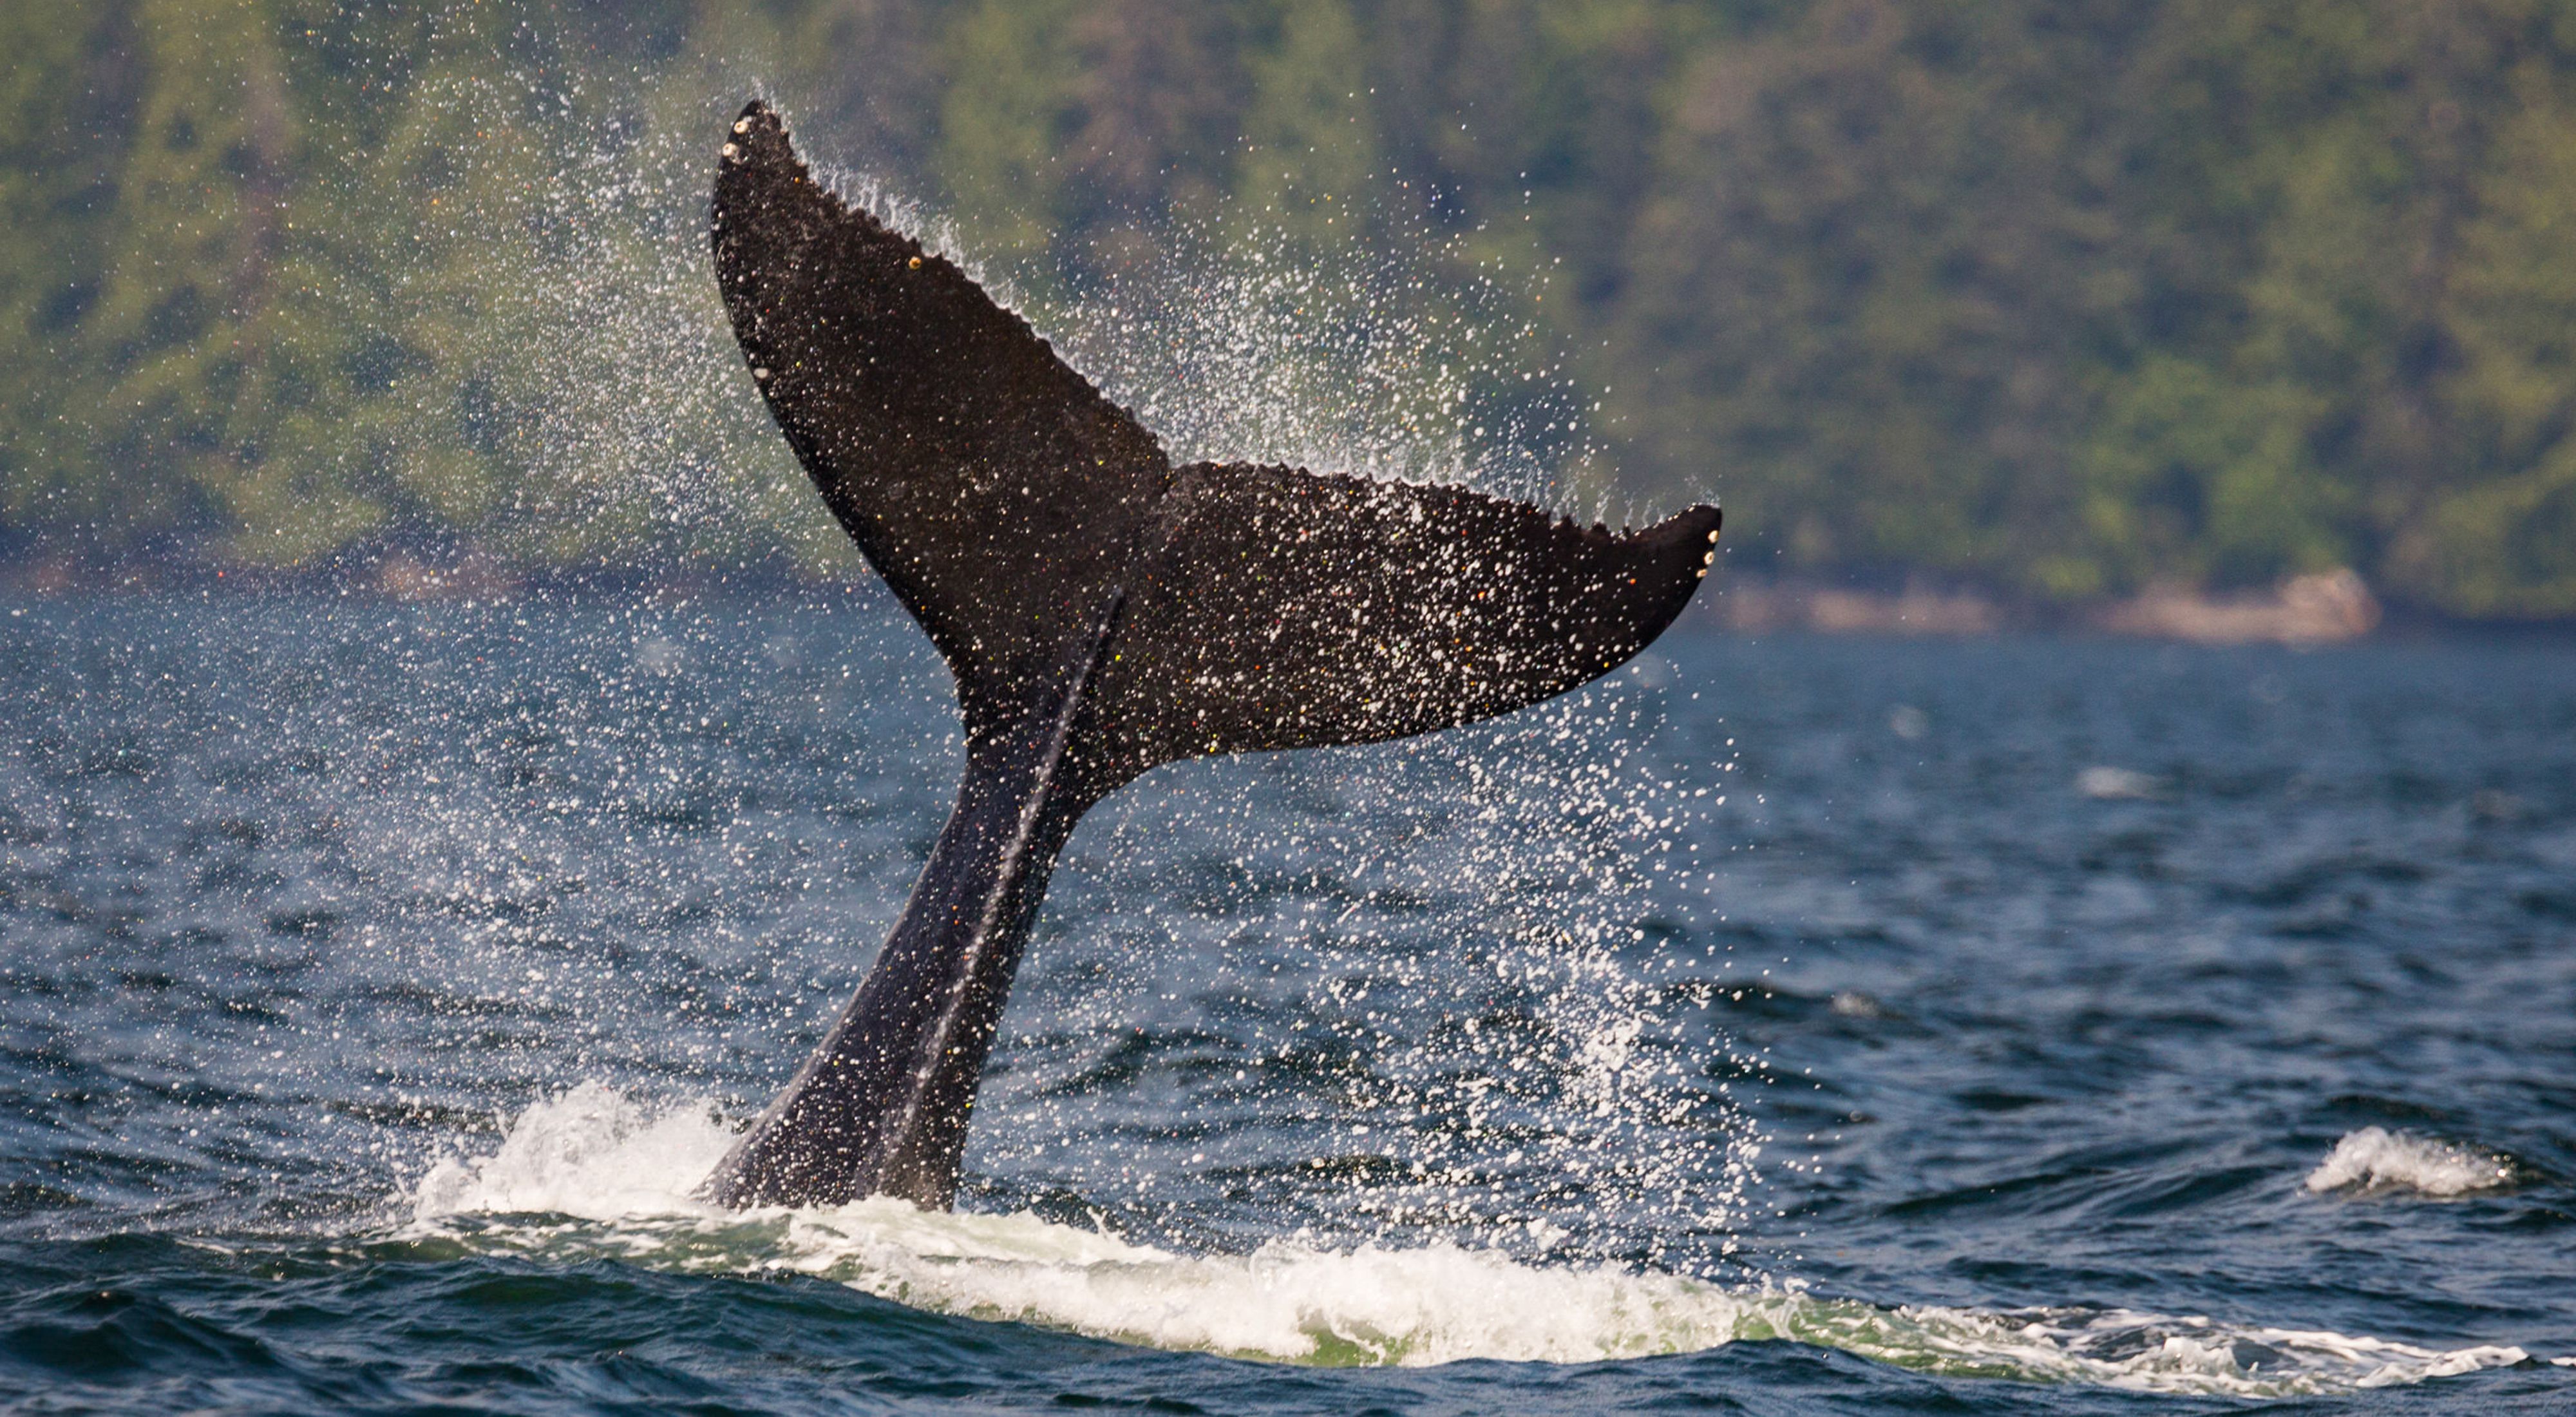 Humpback Whale tail above water